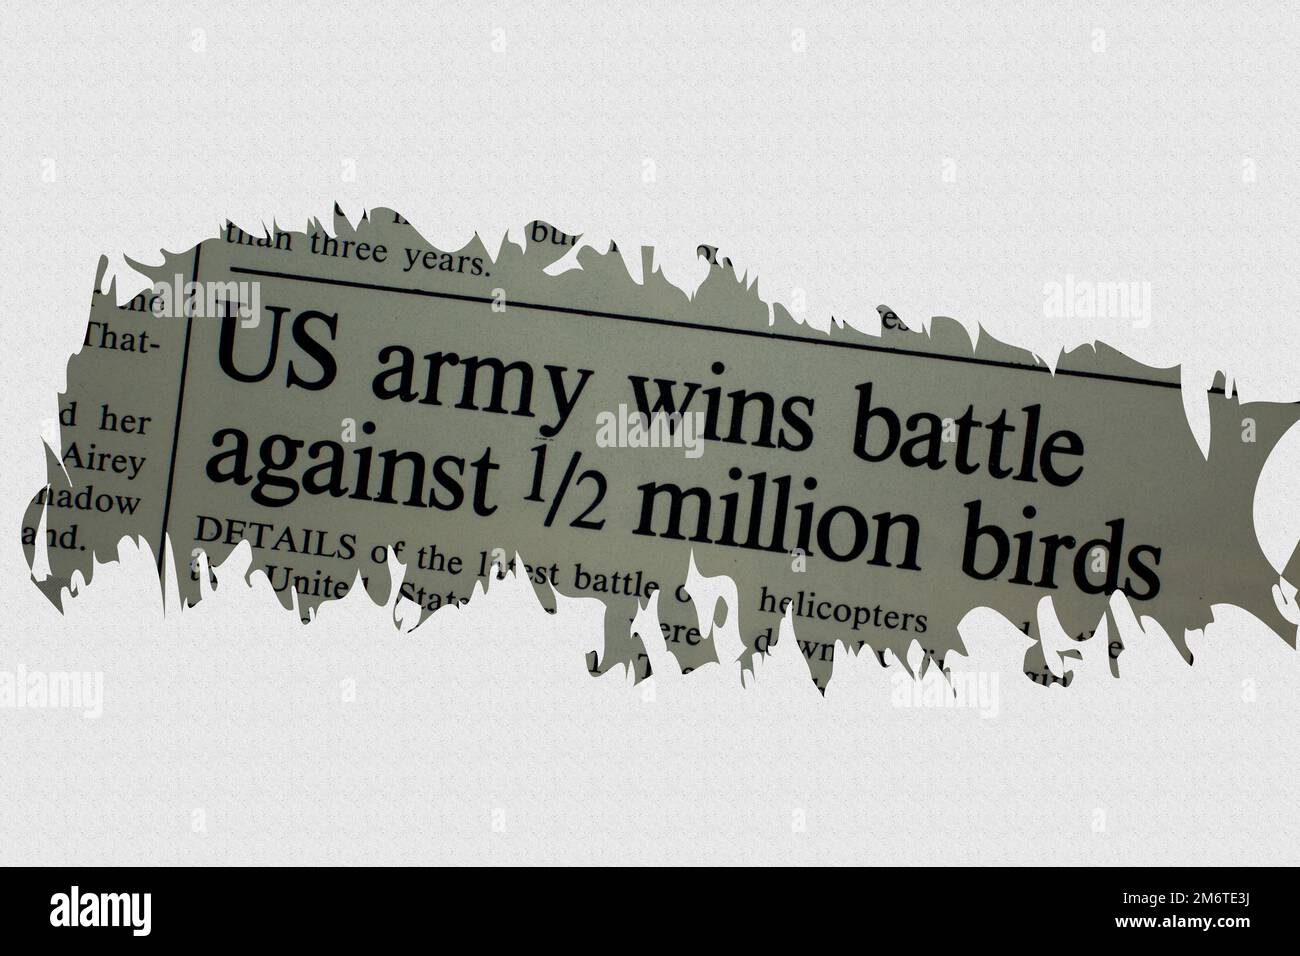 US army wins battle against half million birds - news story from 1975 newspaper headline article title with overlay Stock Photo